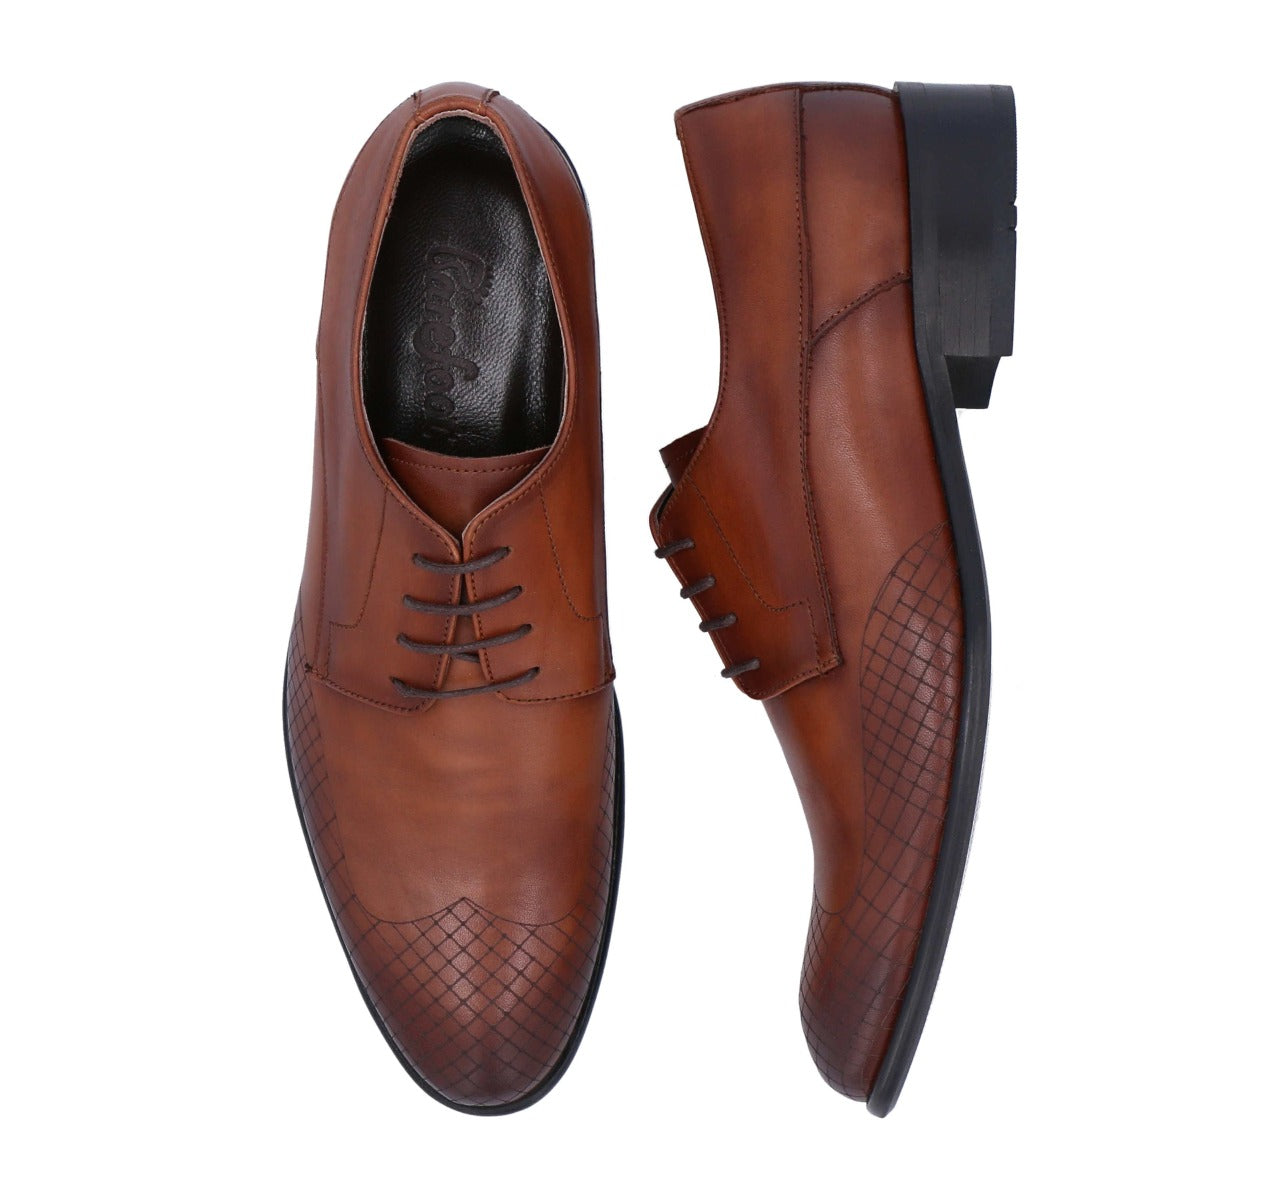 Barefoot Brown Formal Derby's with Black Sole For Men 6214